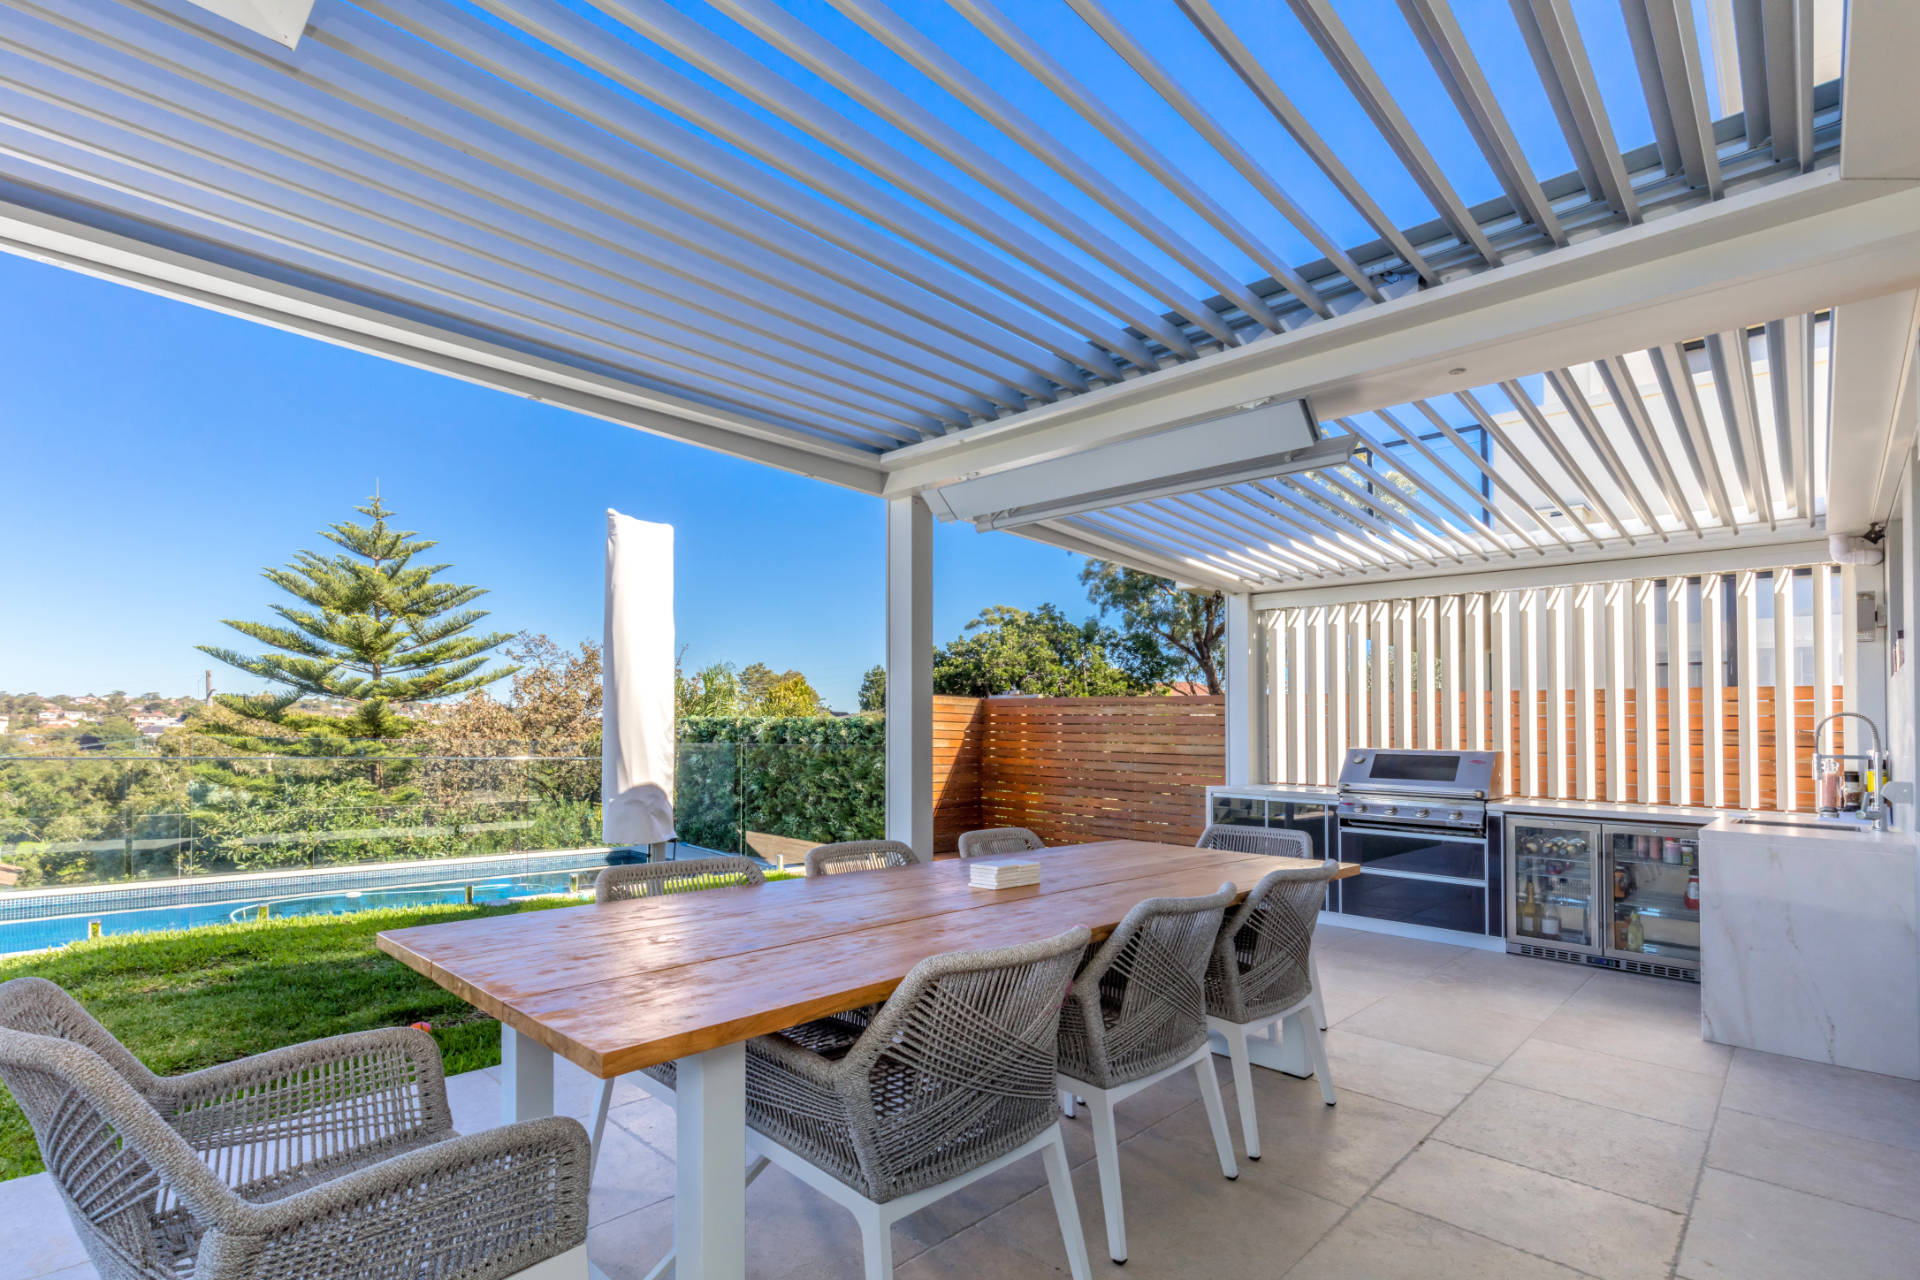 Jaw-Dropping Manly Vale Pergola Construction